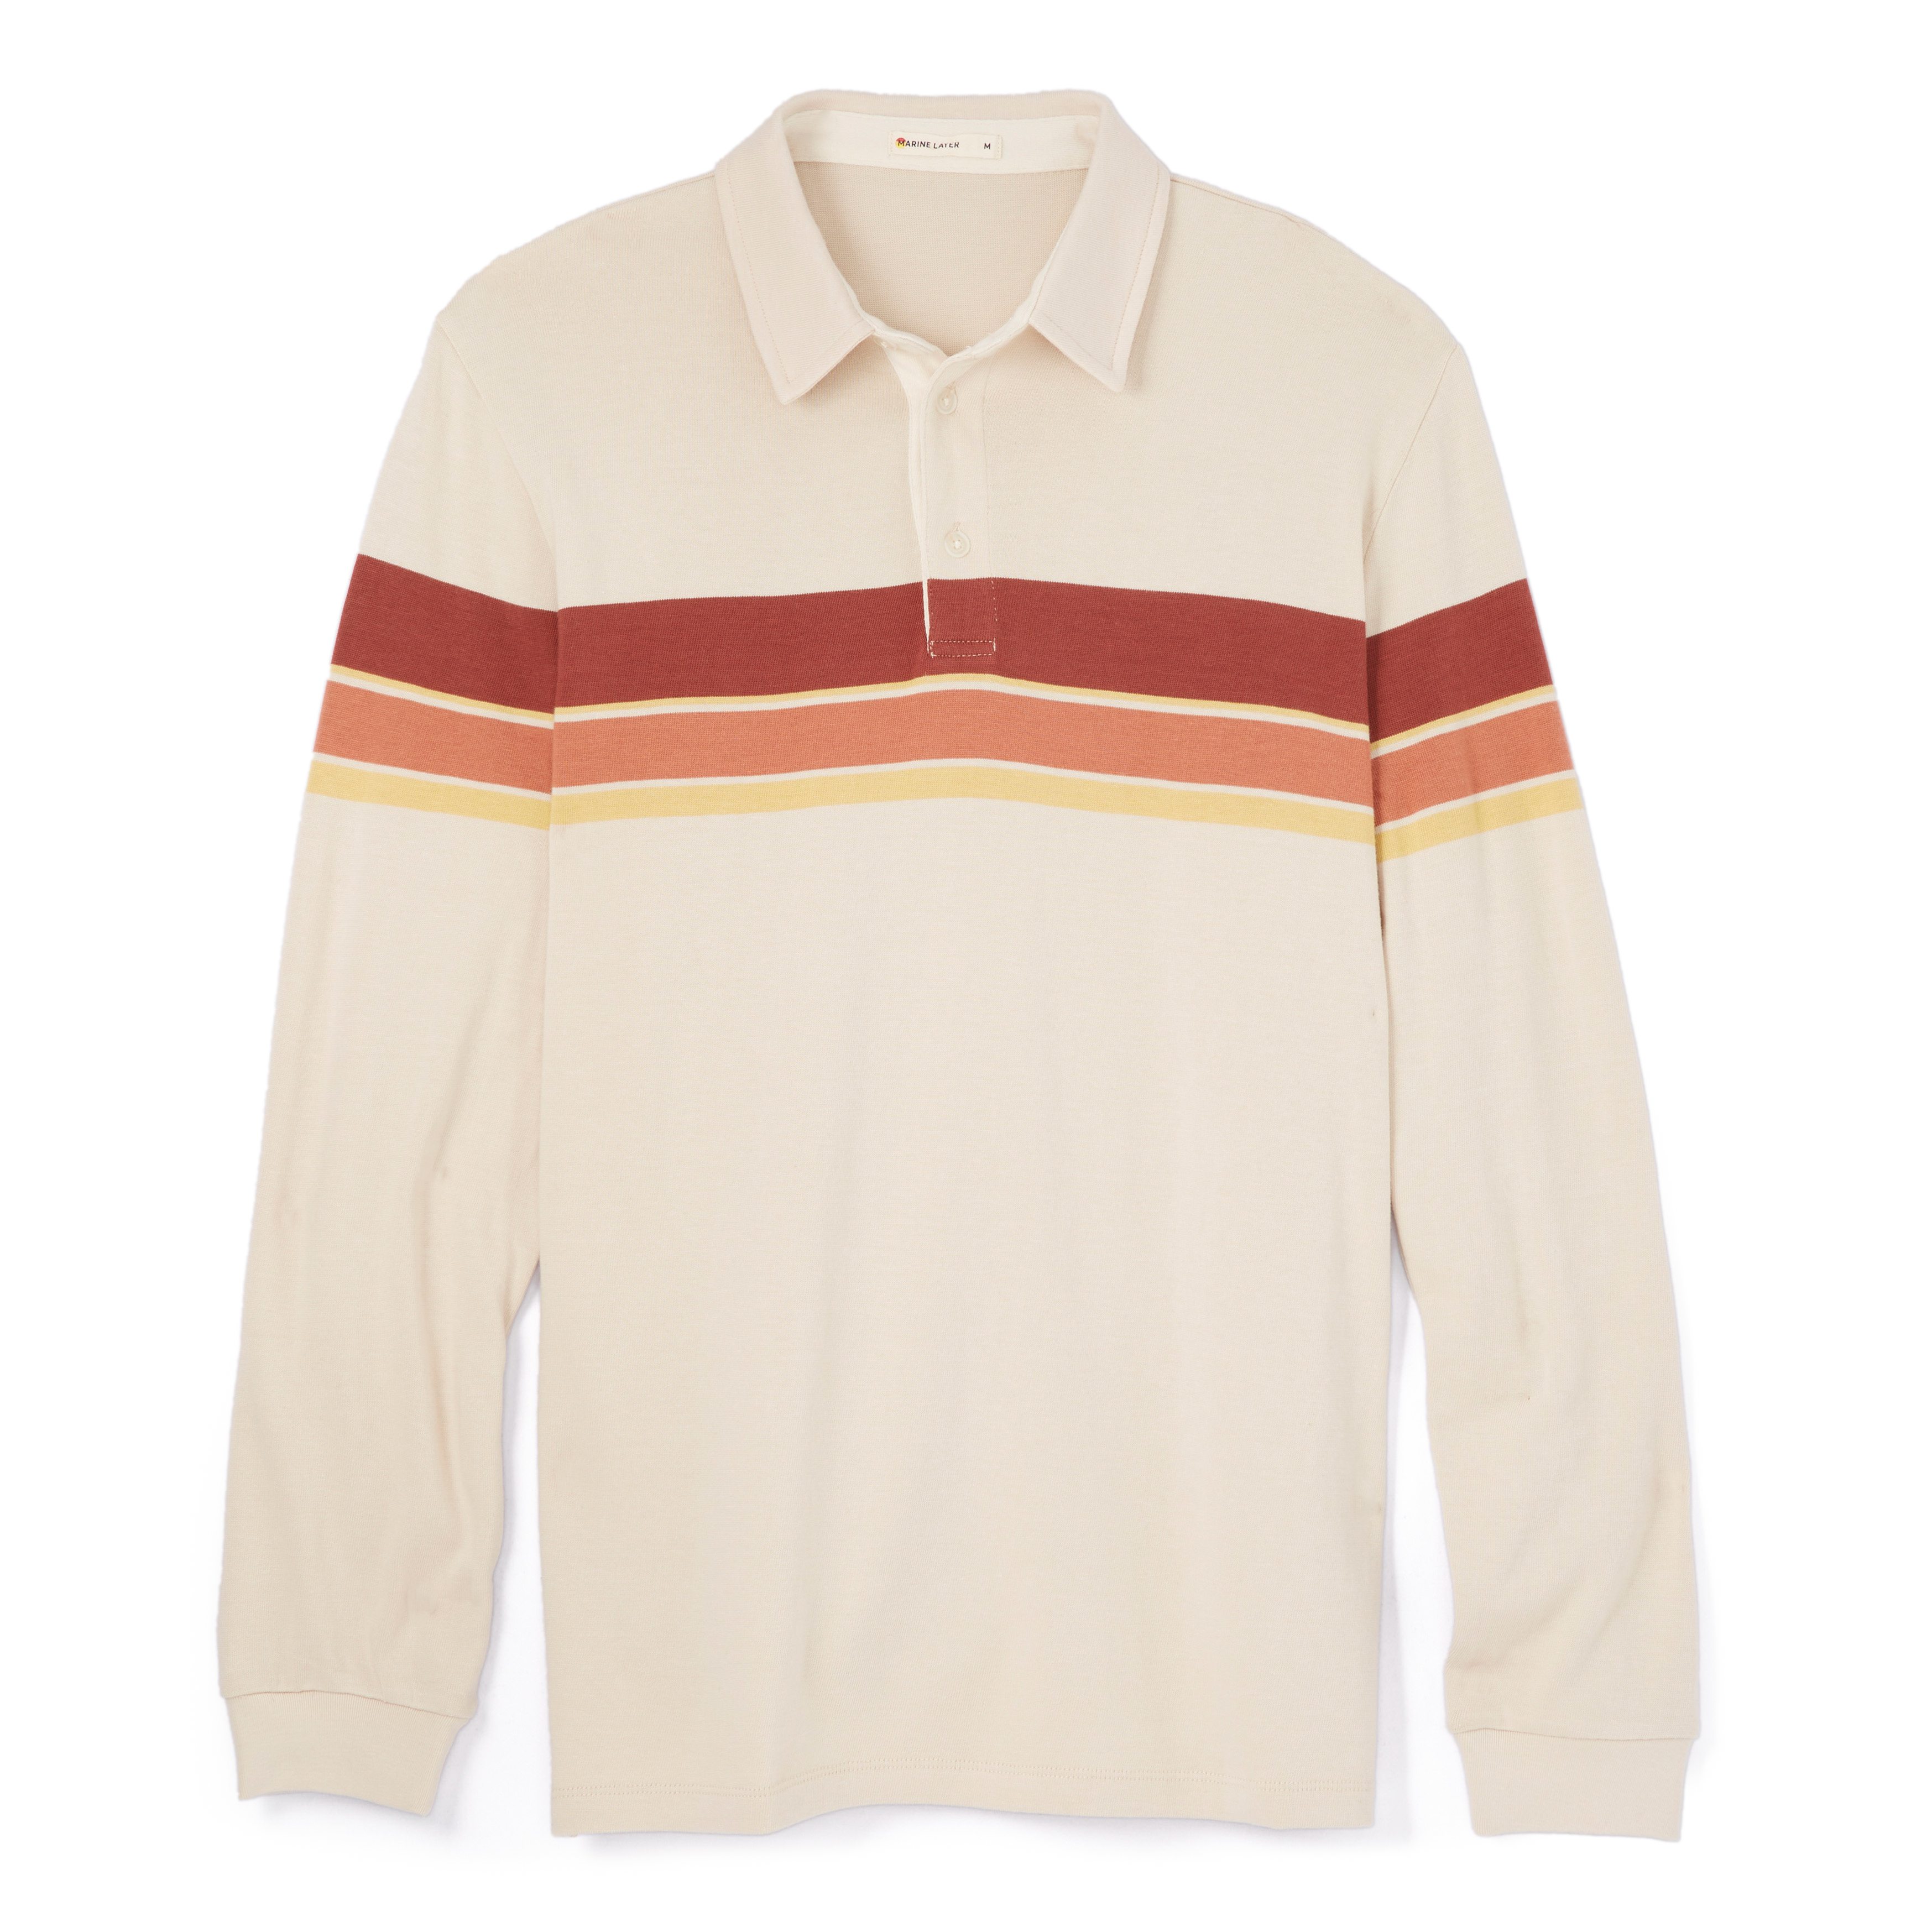 Marine Layer Rugby Polo - Tan/Sunset Stripe | Polo Shirts | Huckberry